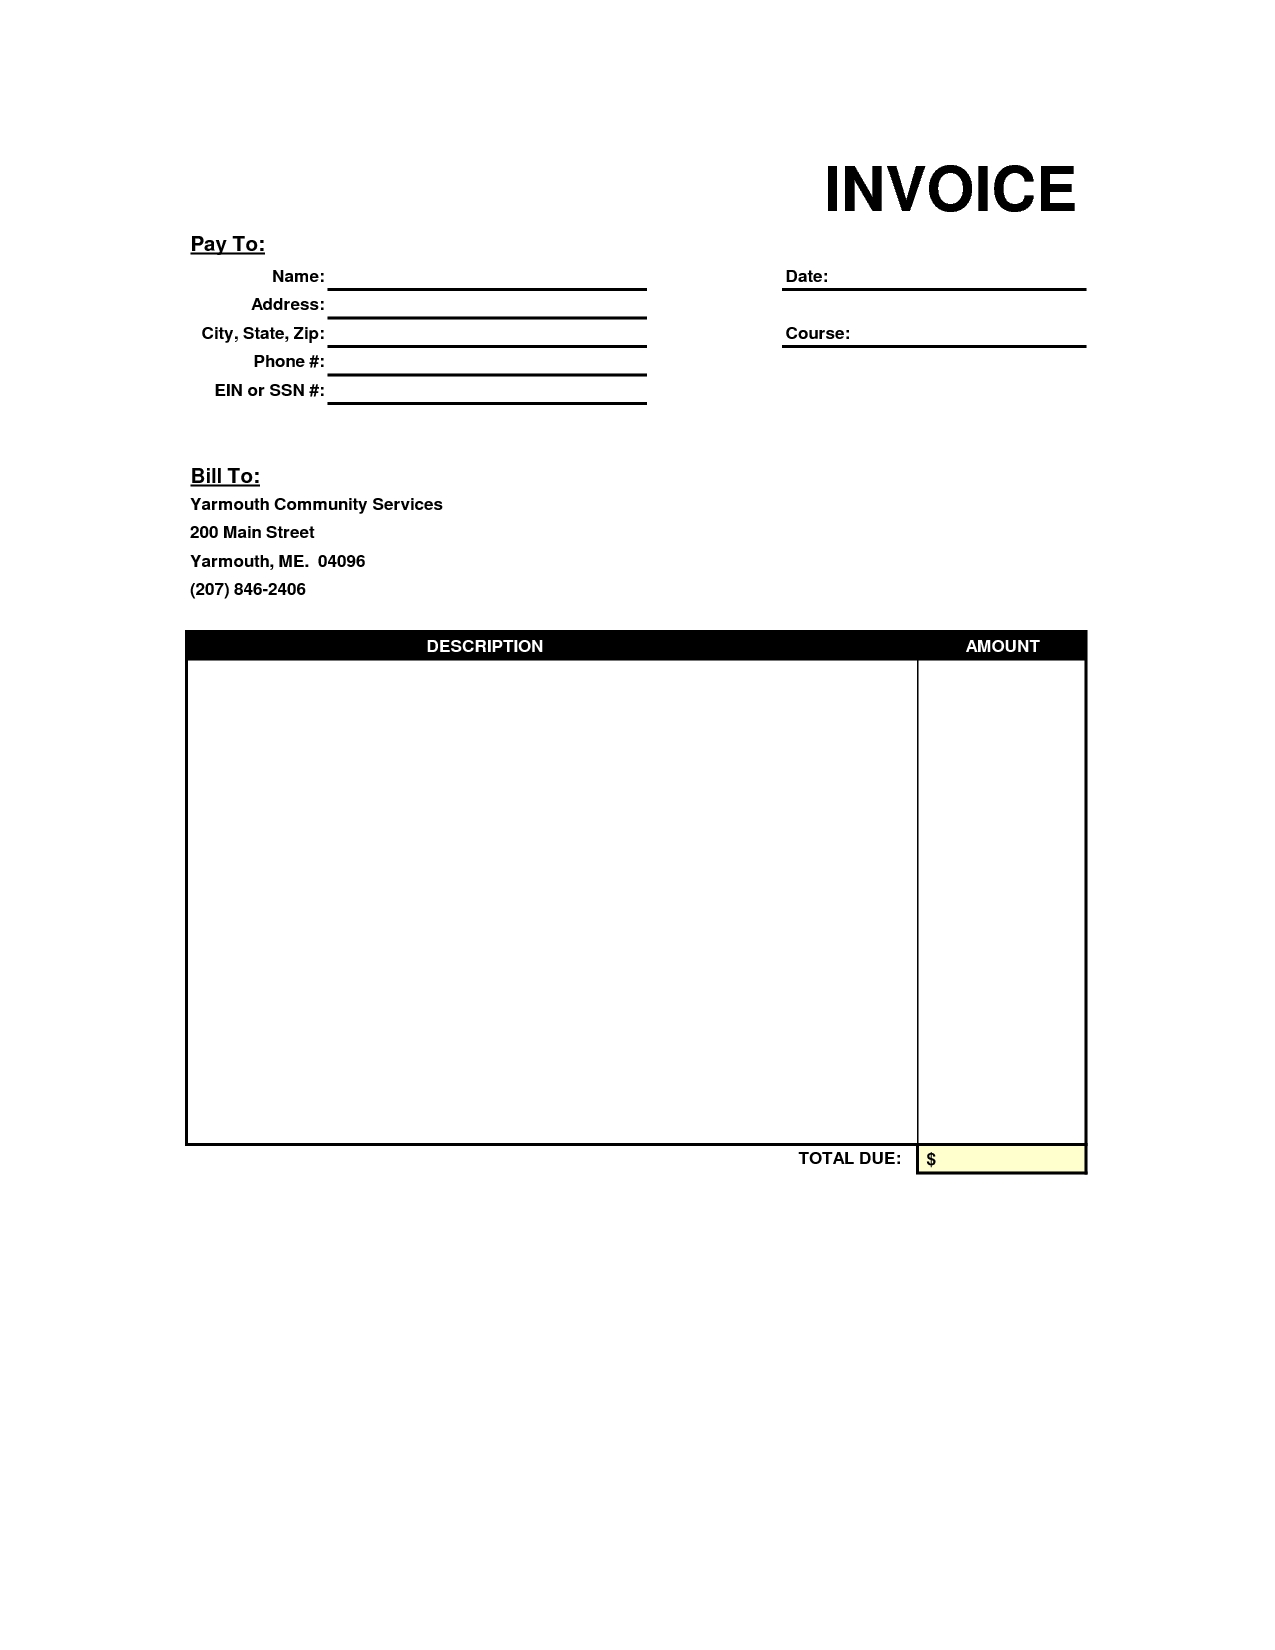 Blank Invoices To Print * Invoice Template Ideas